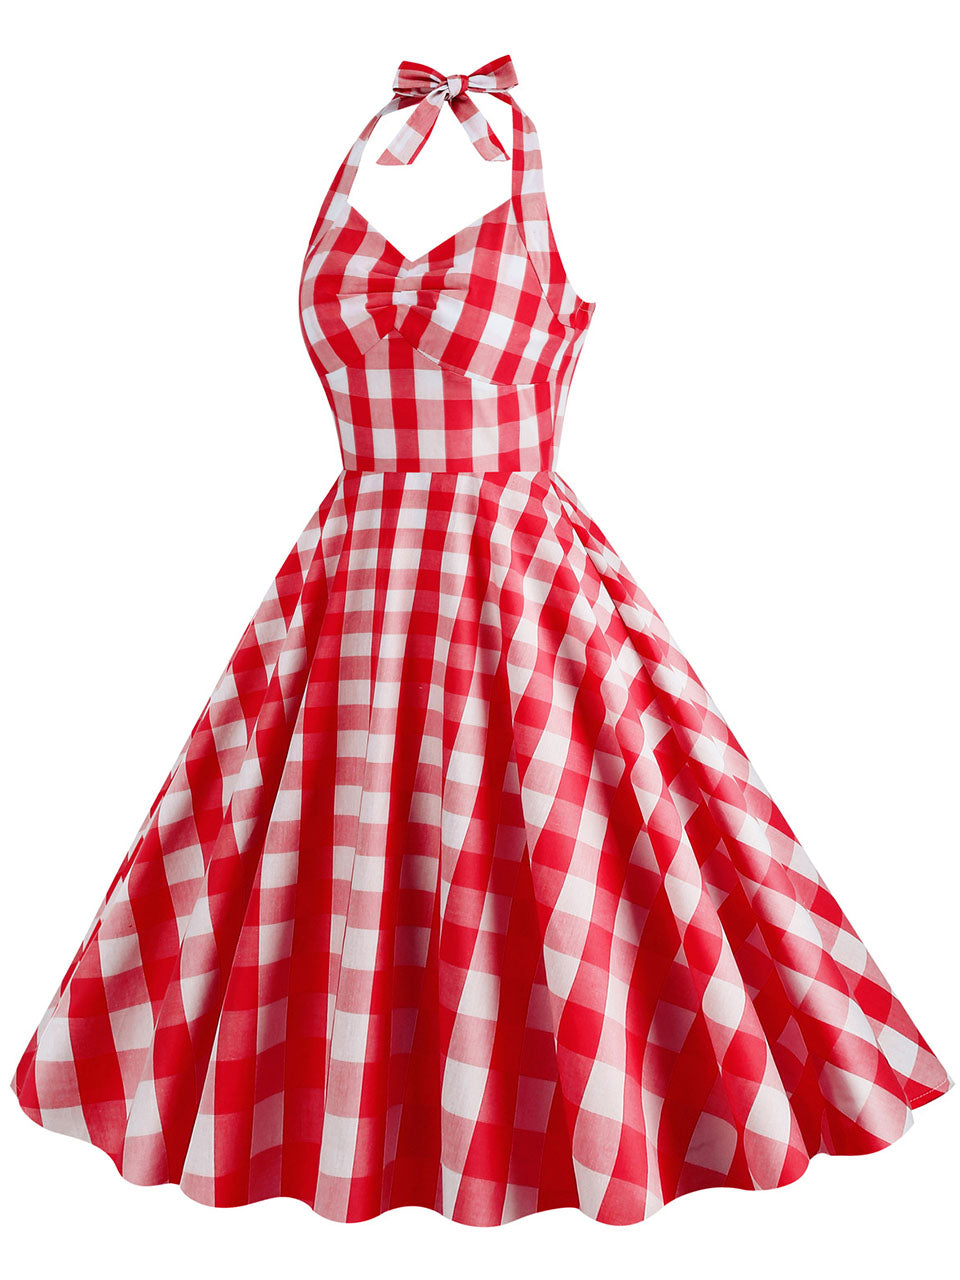 HAOTAGS Plaid Dress for Women 50s Dresses 1950s Swing Dresses Pin Up Knee  Length Dress Pink Size S